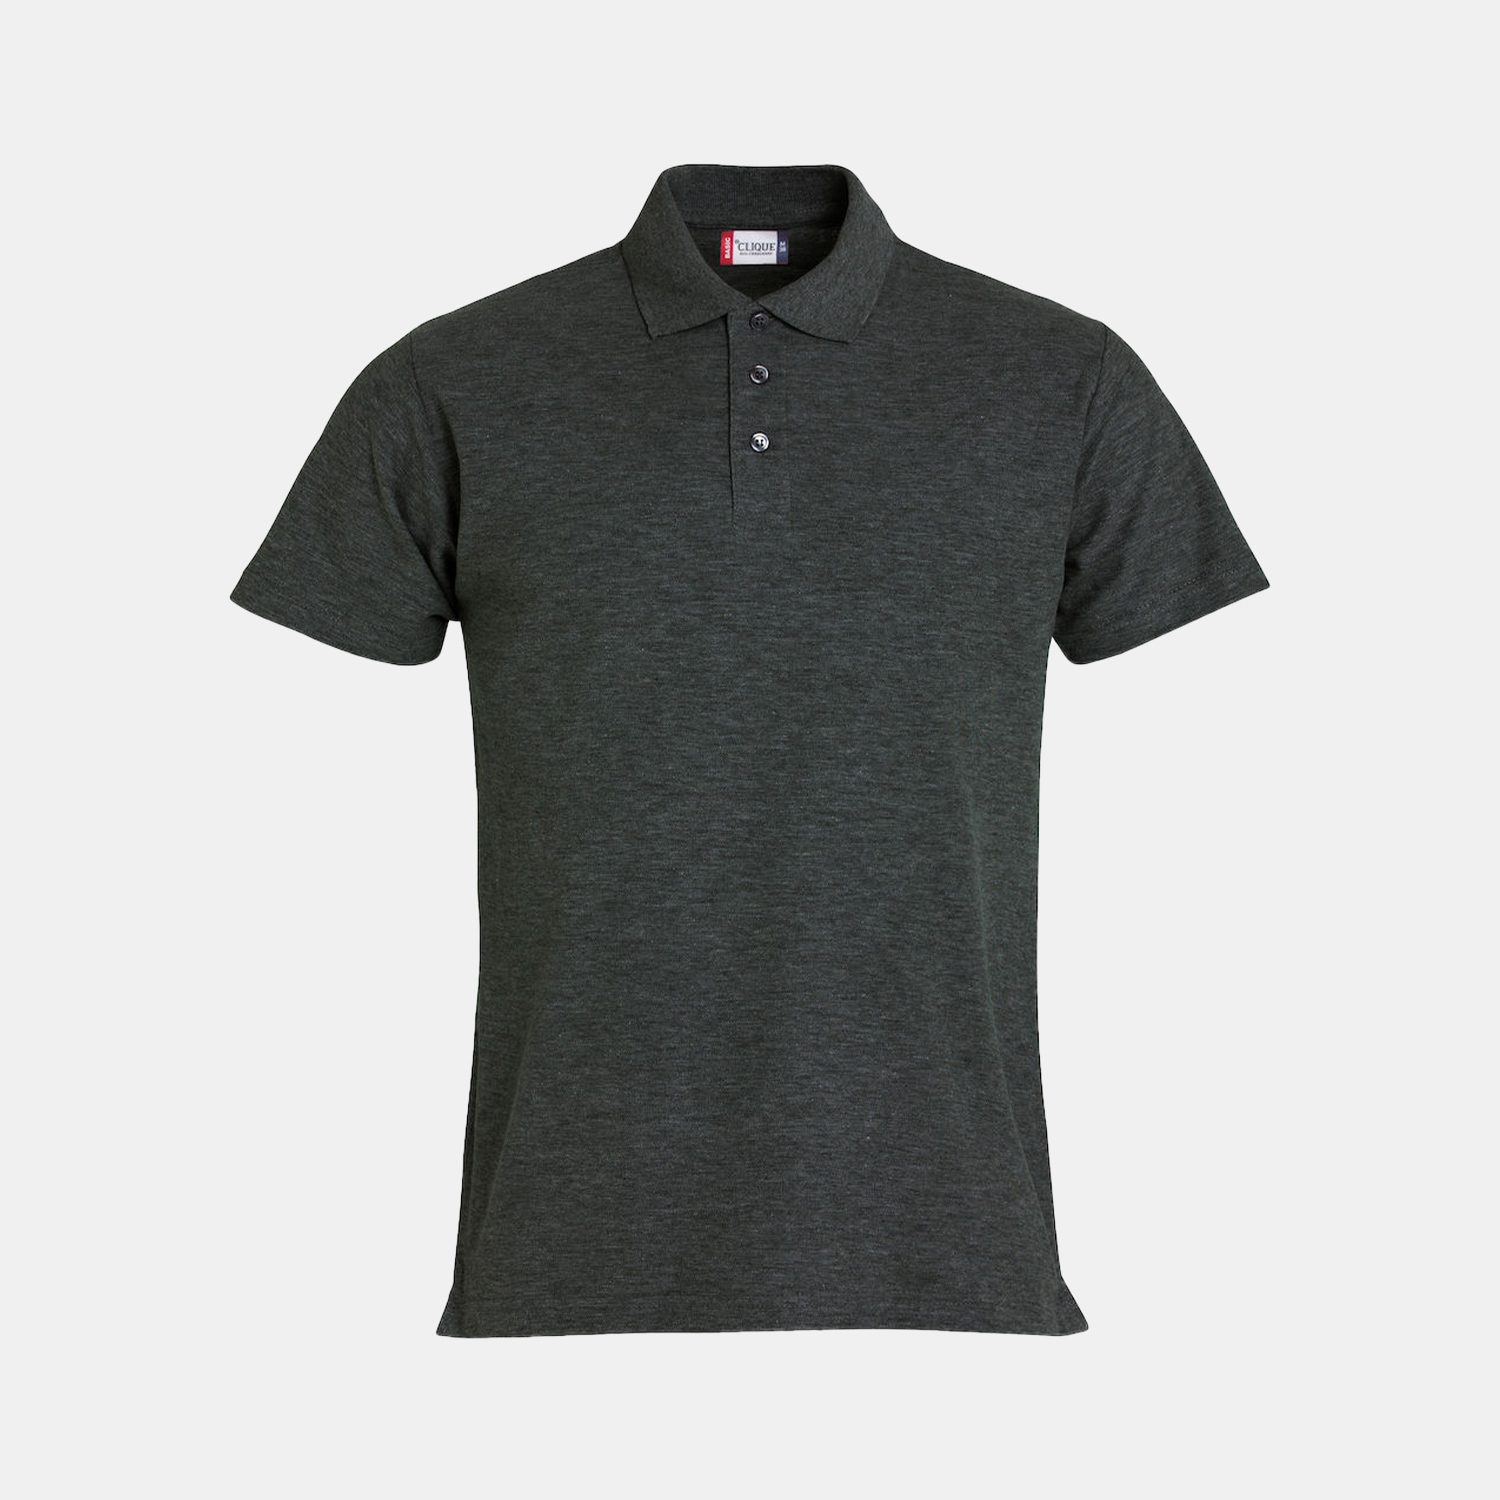 An advertising classic: The Basic Polo Shirt | SUGGLE